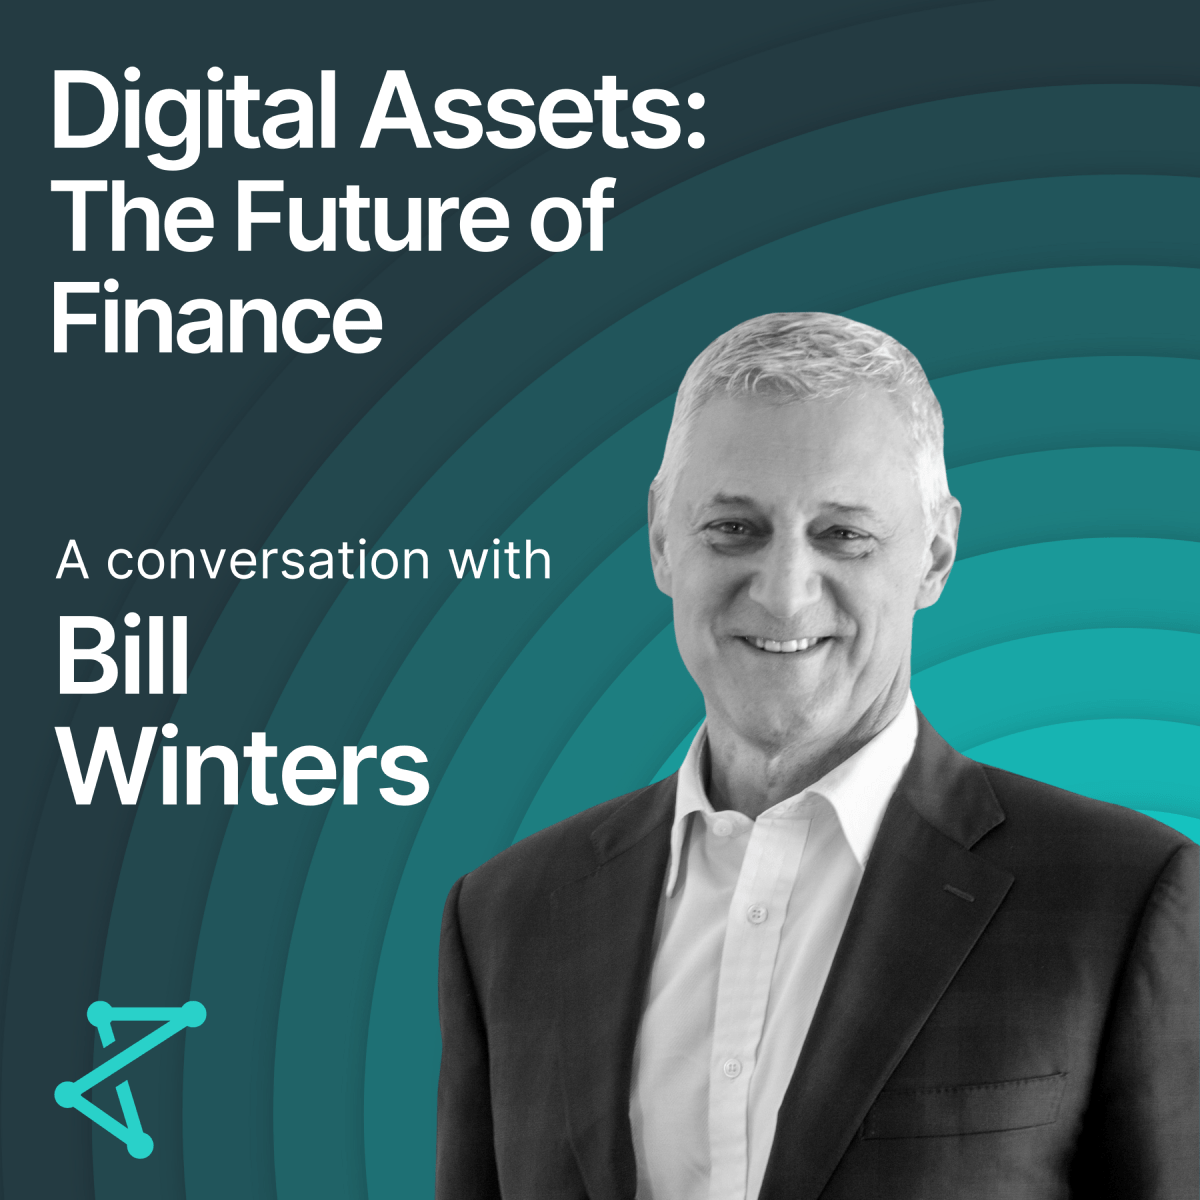 Digital Assets: The Future of Finance.